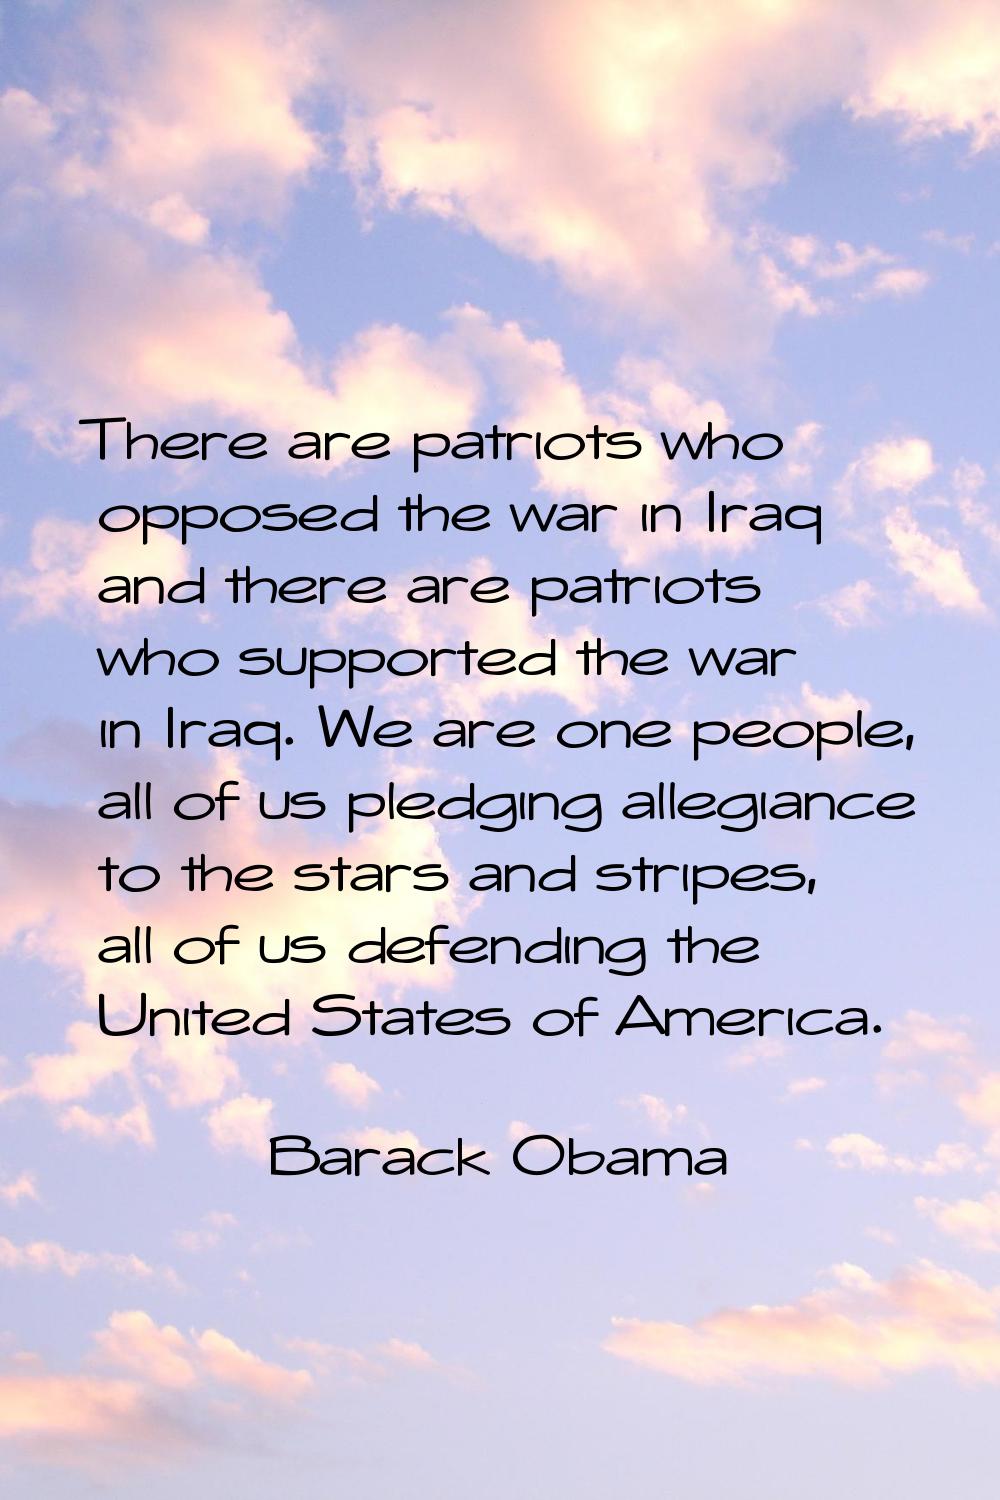 There are patriots who opposed the war in Iraq and there are patriots who supported the war in Iraq